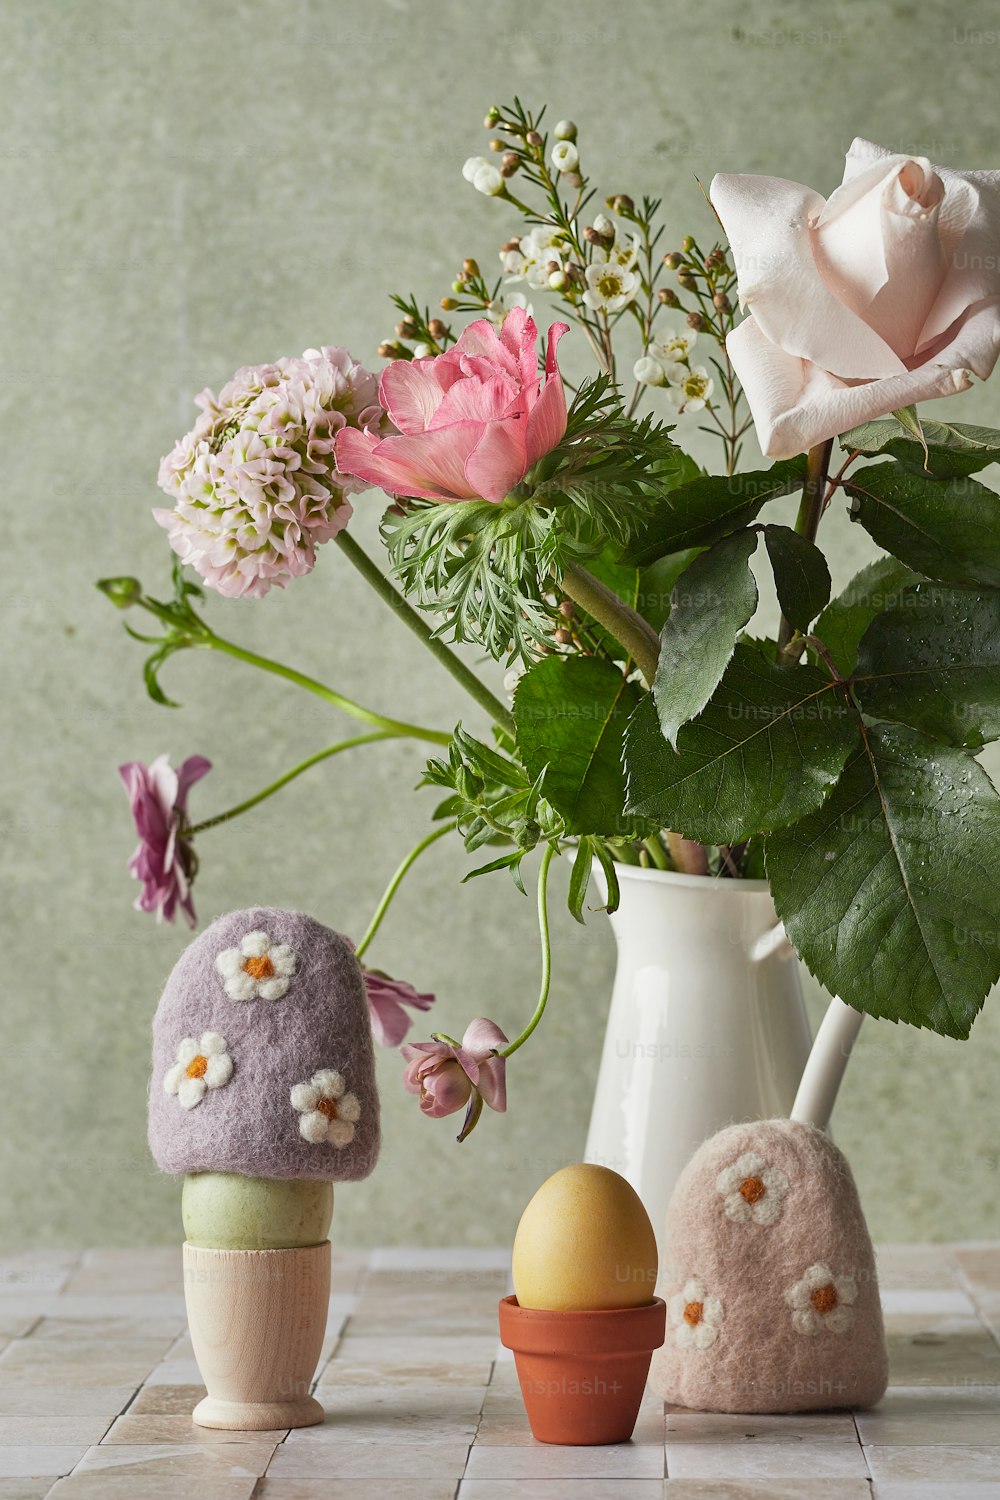 a vase filled with flowers next to two small eggs